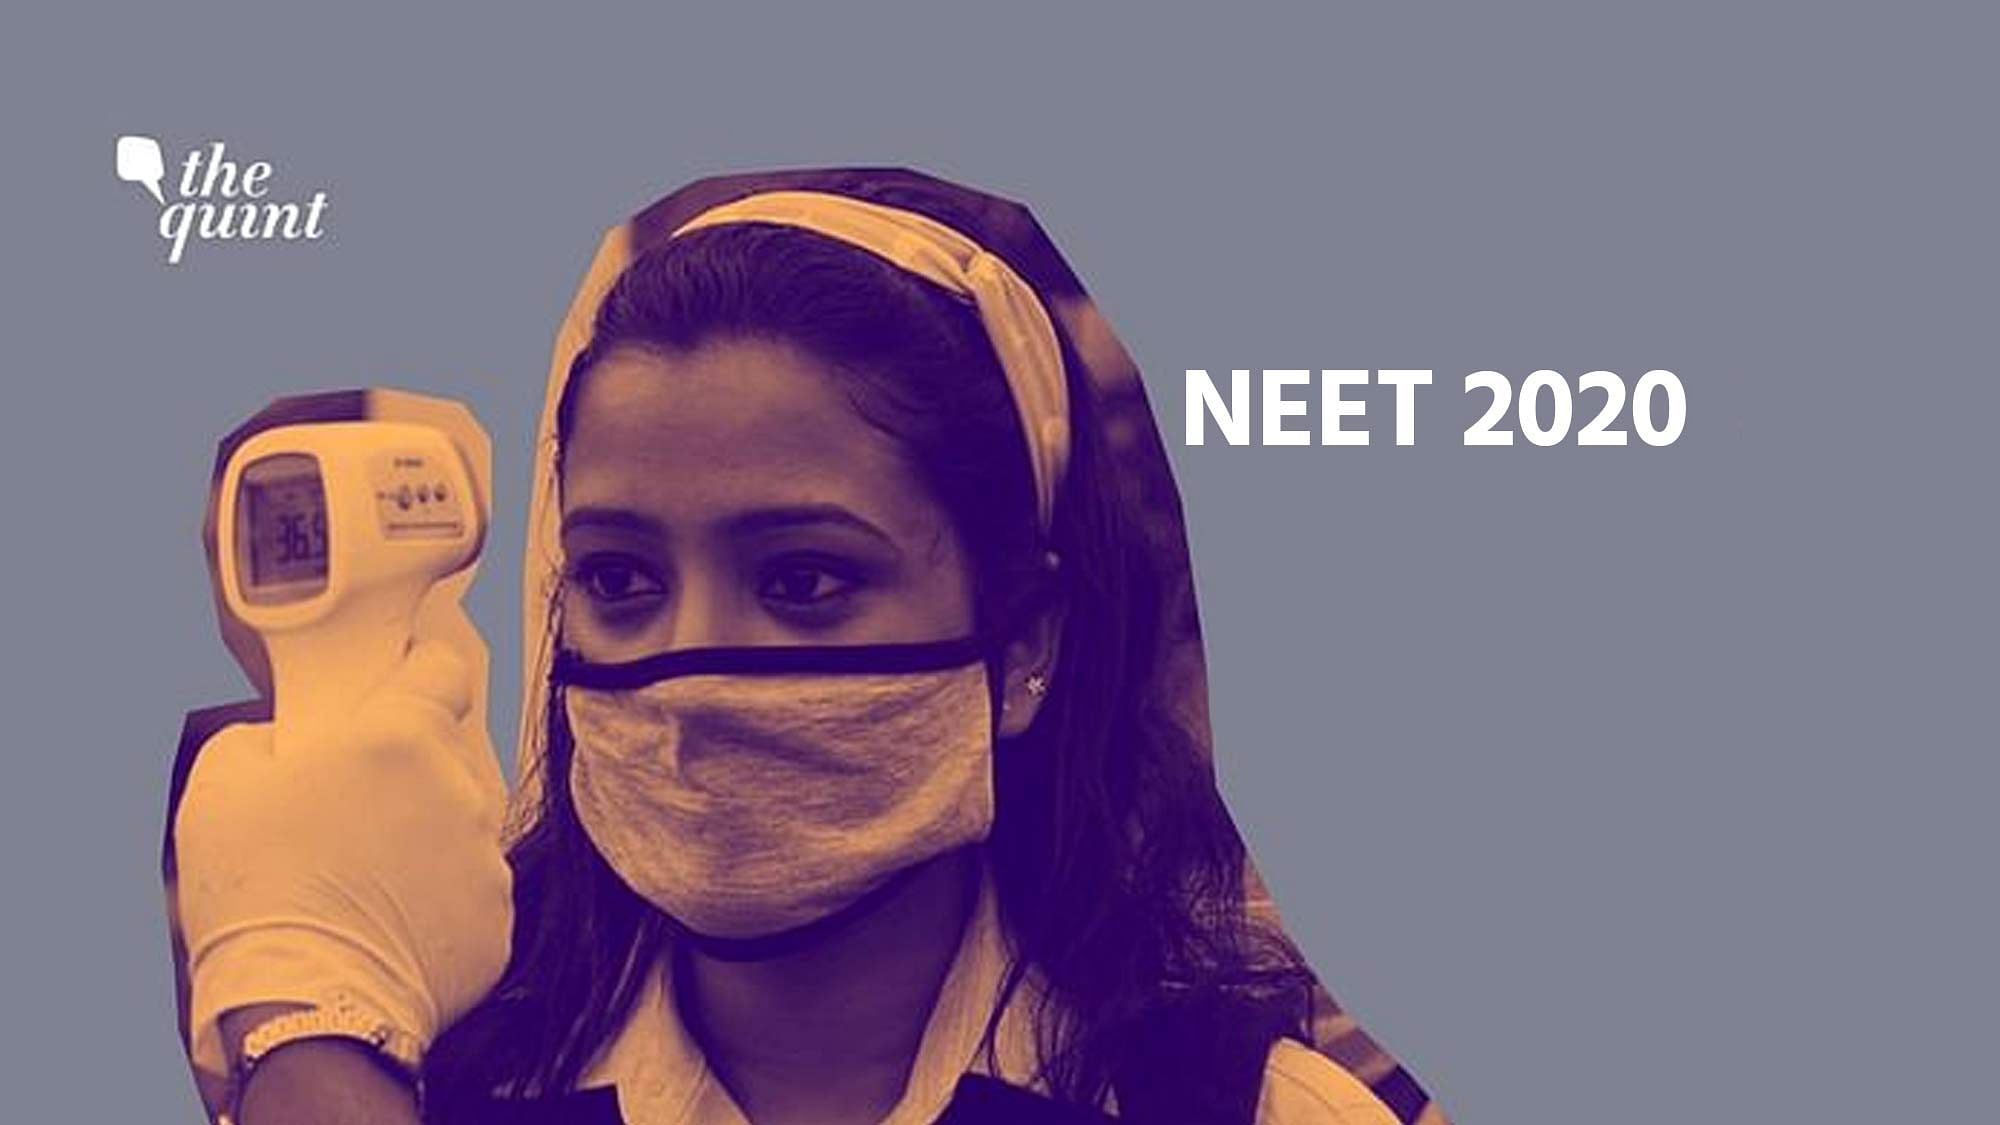 With just a few days to go for NEET 2020, here are some tips for students who are preparing for the exams.